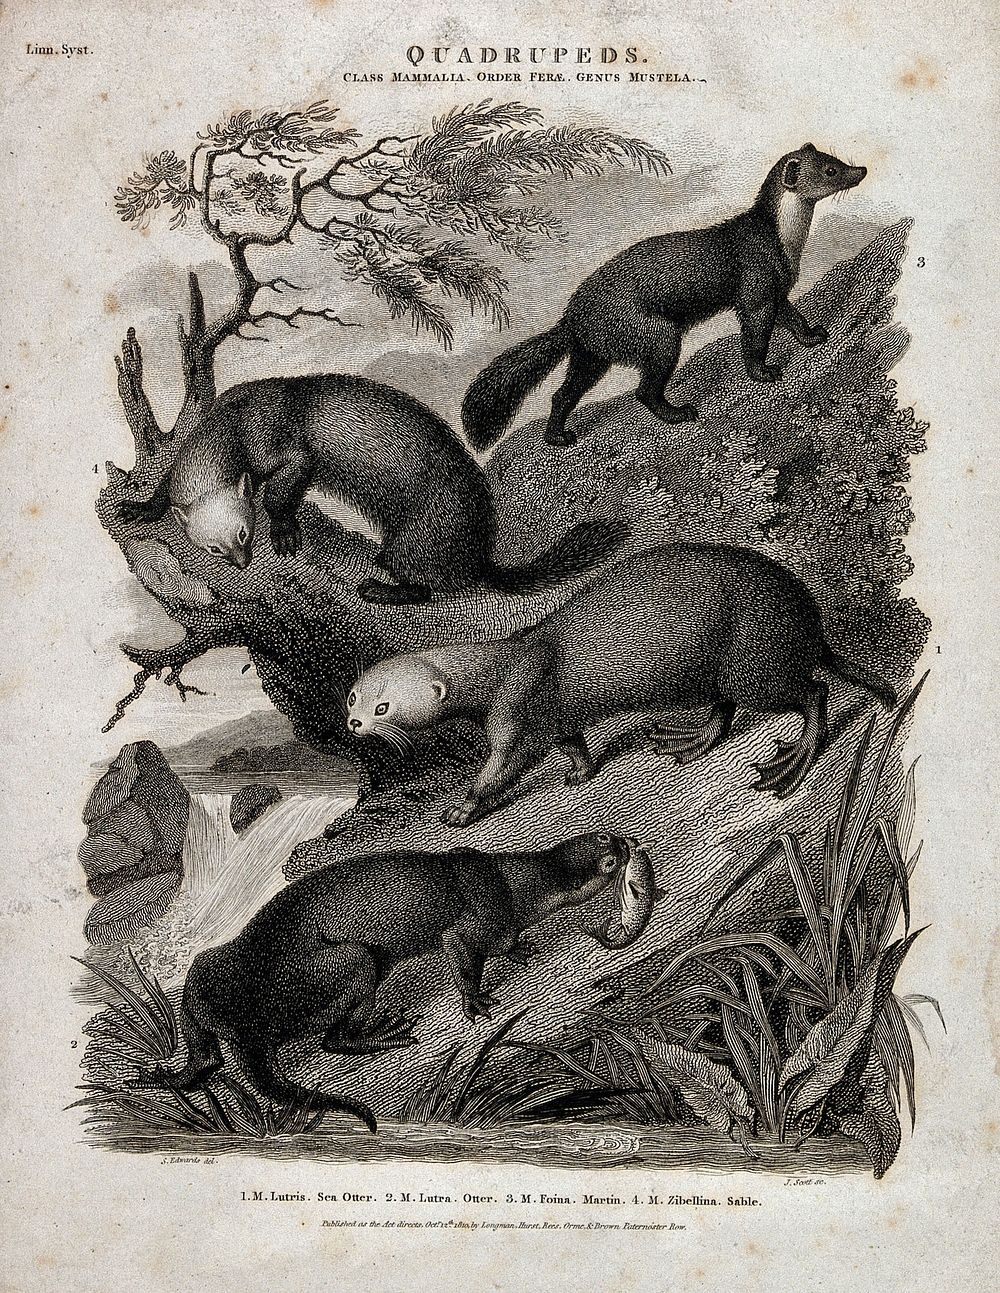 Four four-footed mammals of the order Ferae shown in their natural habitat. Line engraving by S. Edwards after J. Scott…